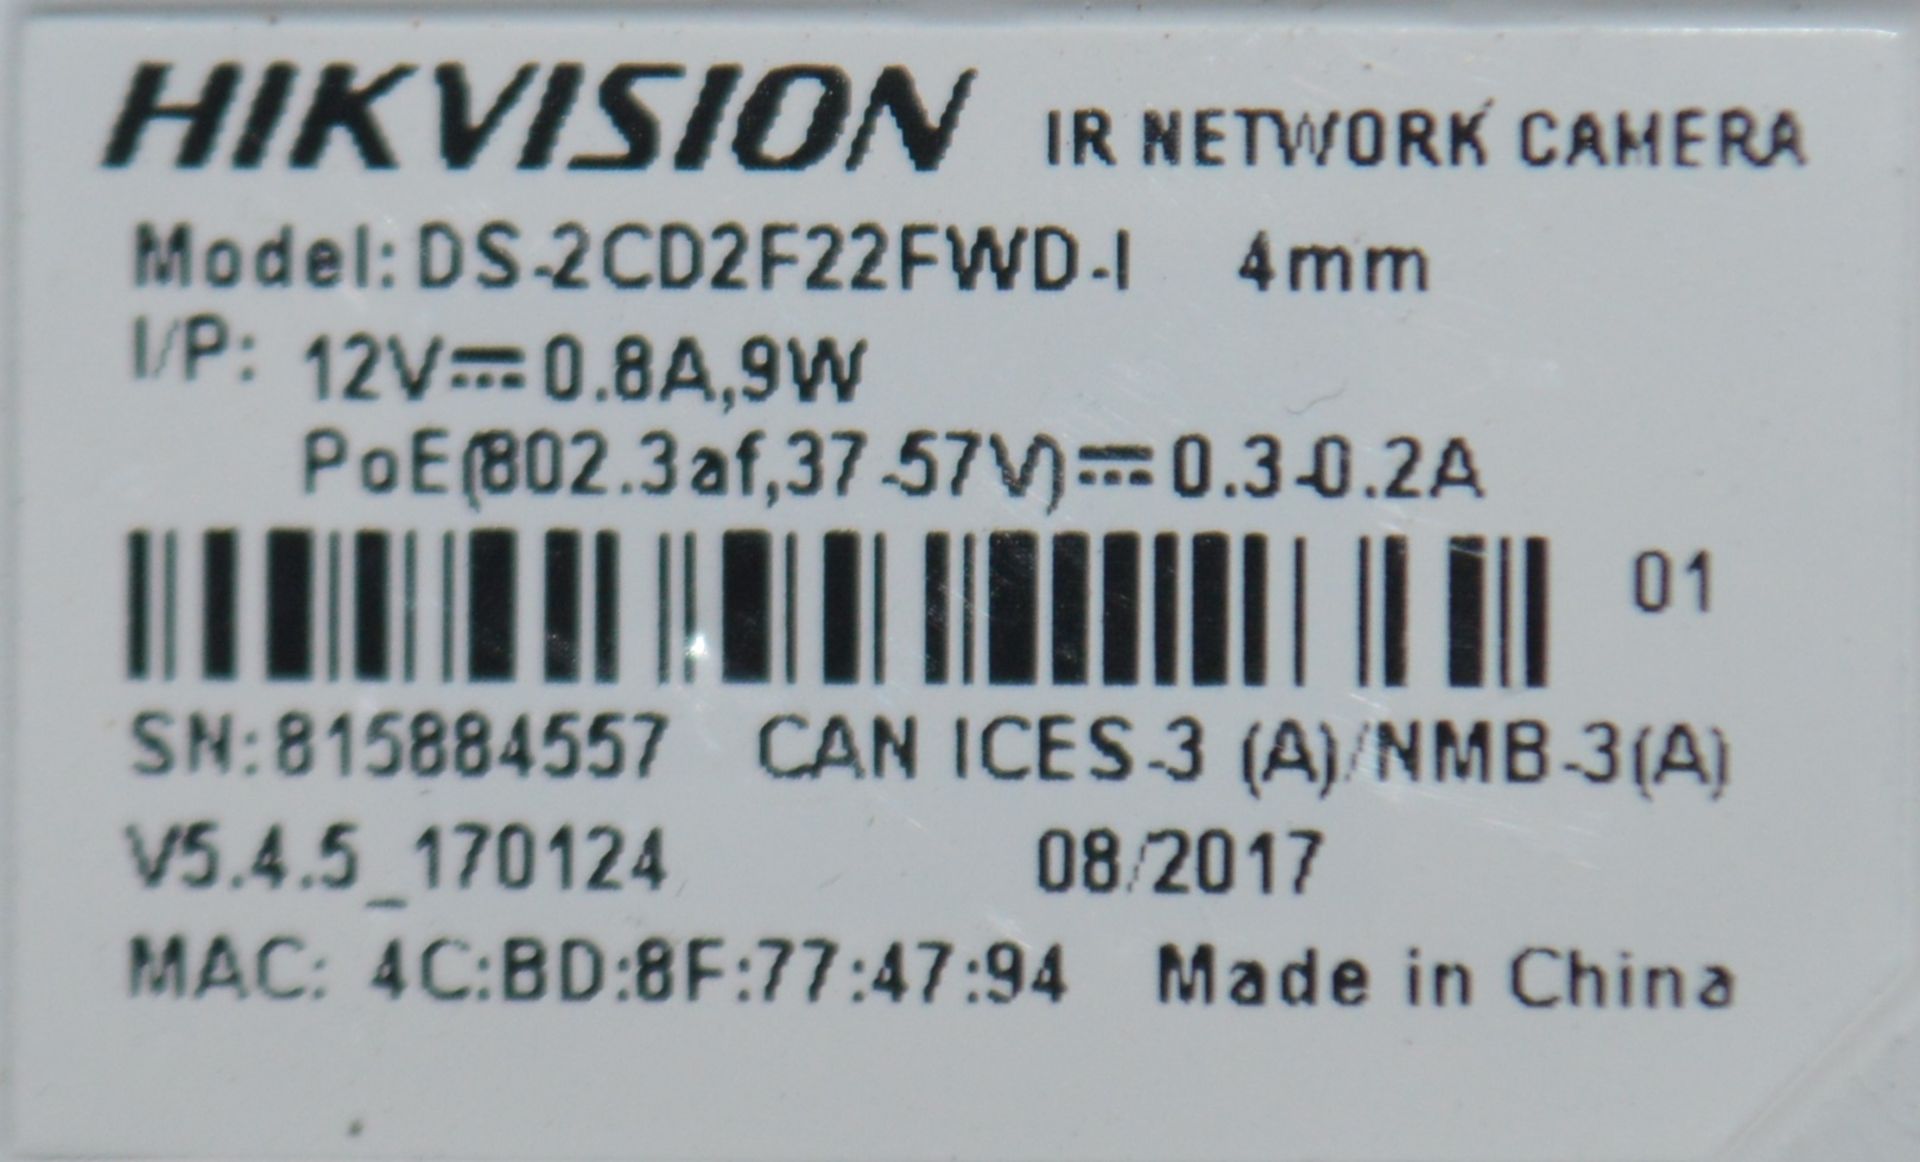 10 x Hikvision Full HD Day/Night Pan/Tilt Network Dome CCTV Security Cameras - Model number: DS- - Image 6 of 7